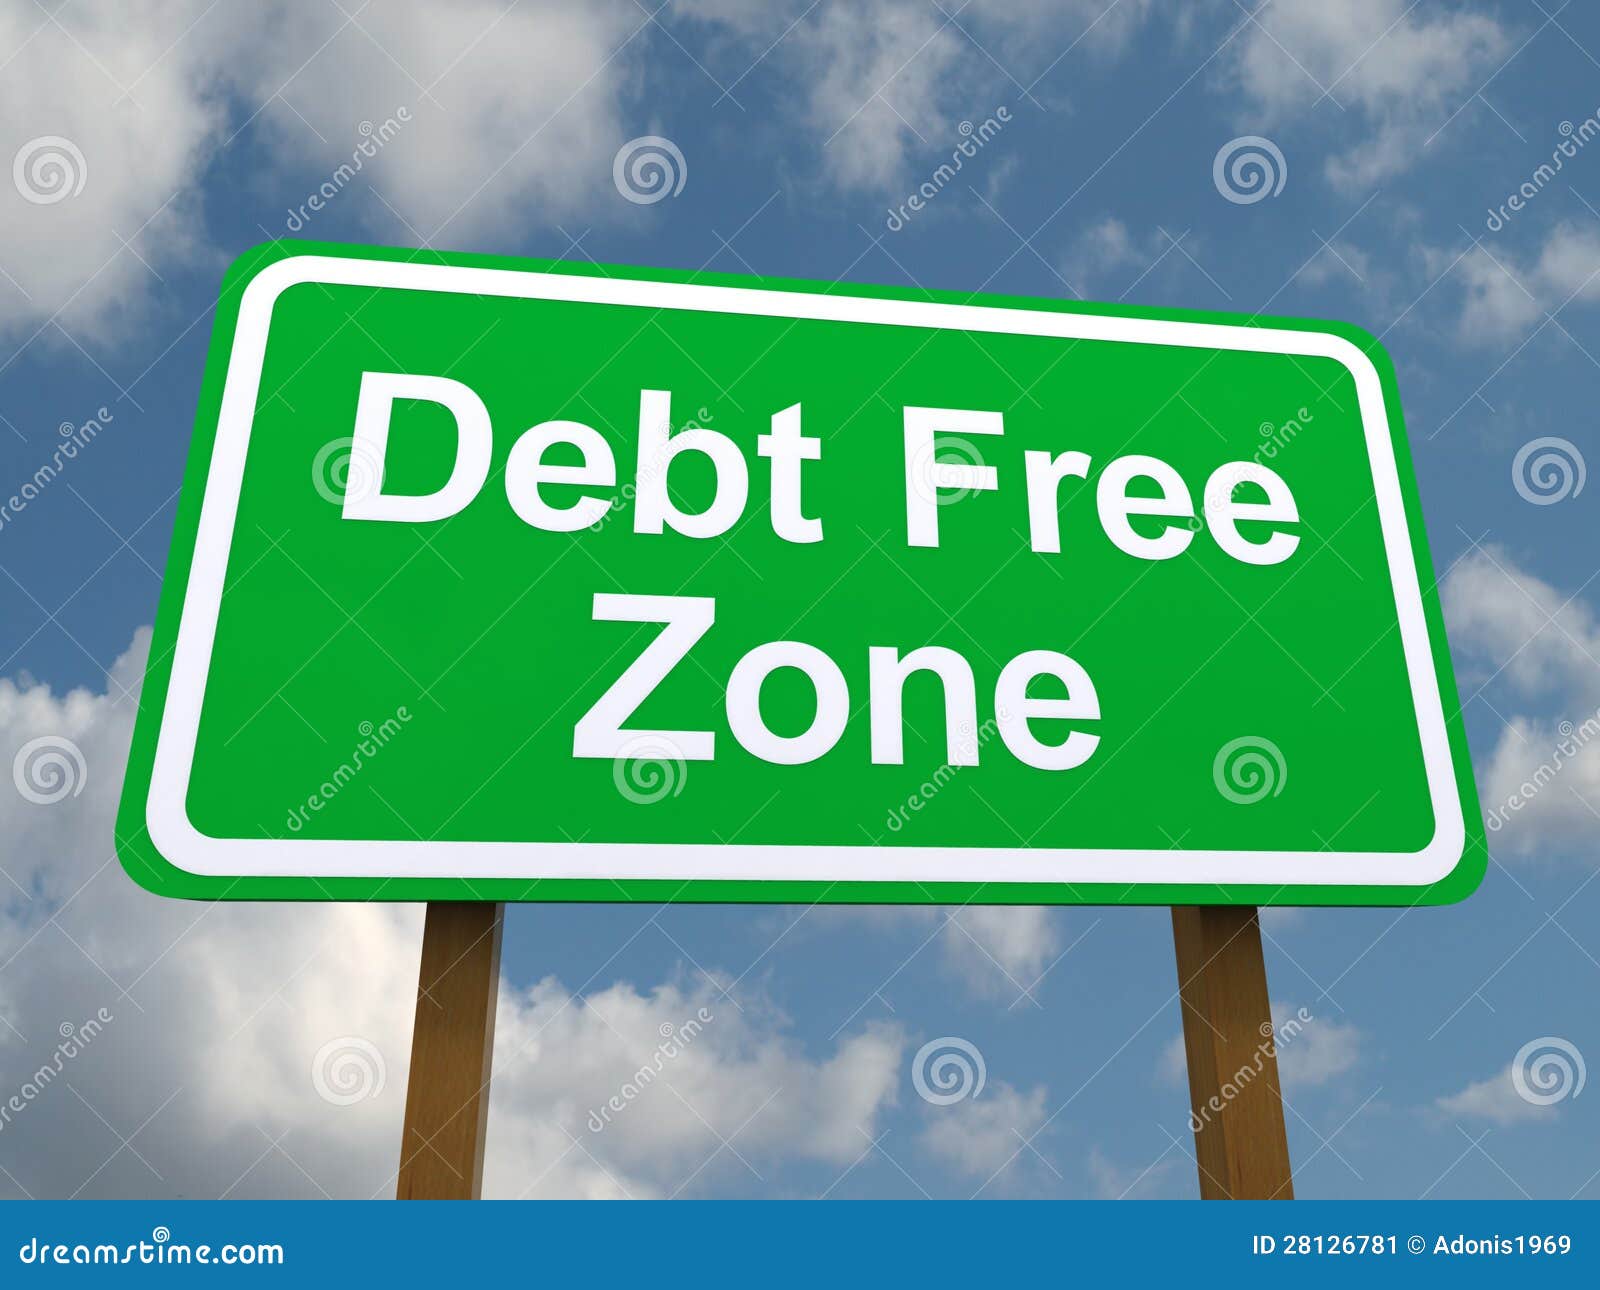 debt free zone road sign